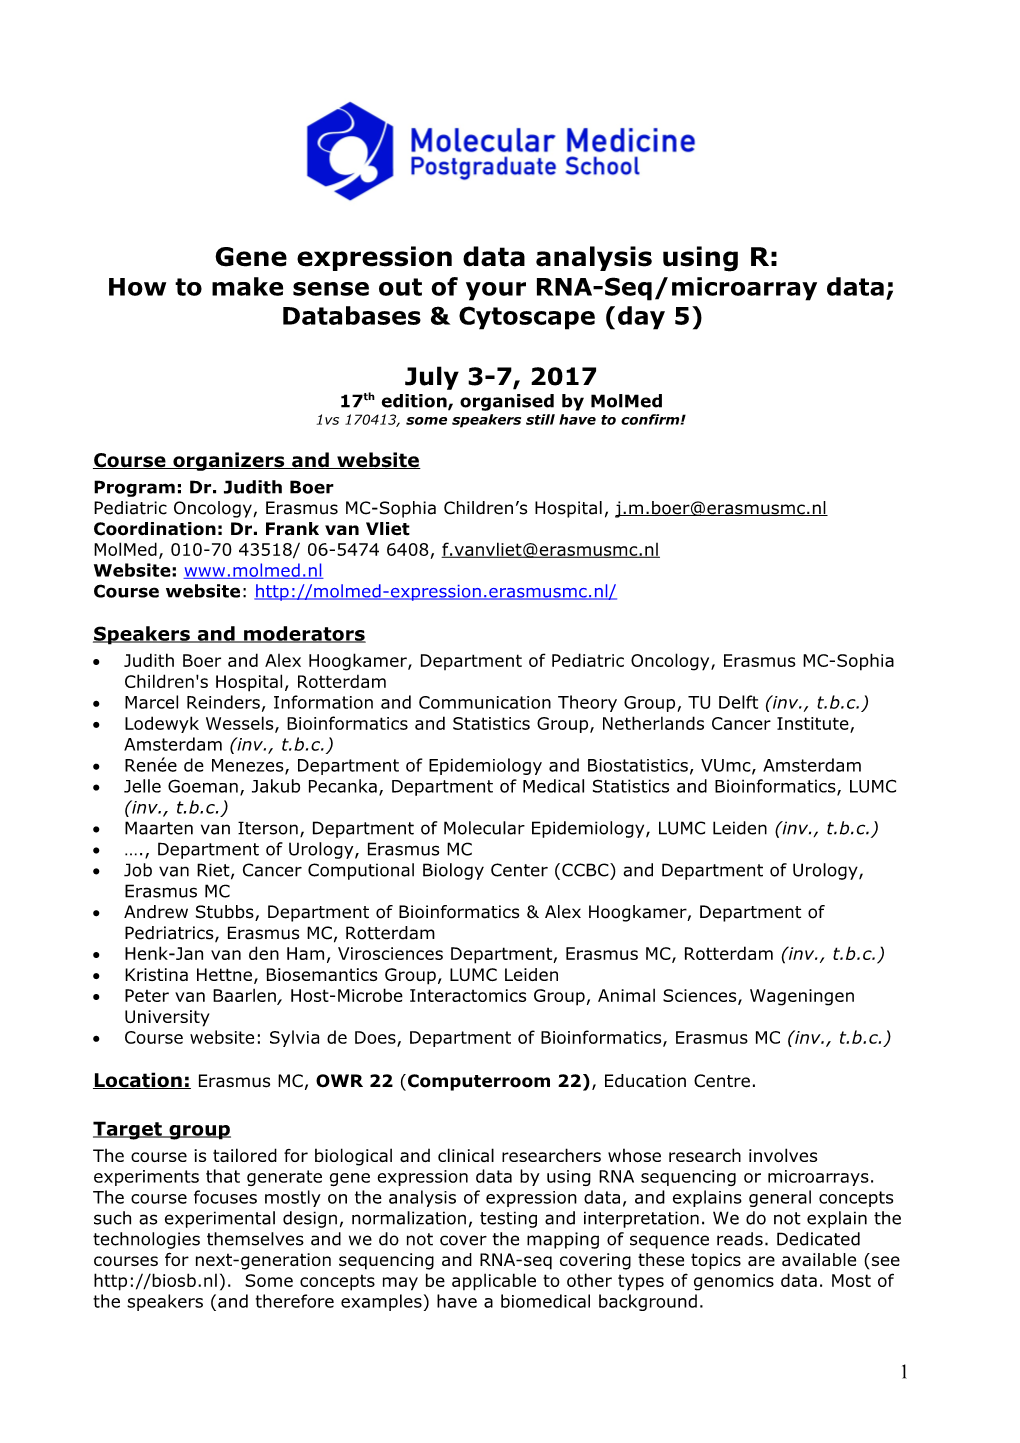 How to Make Sense out of Your RNA-Seq/Microarray Data;